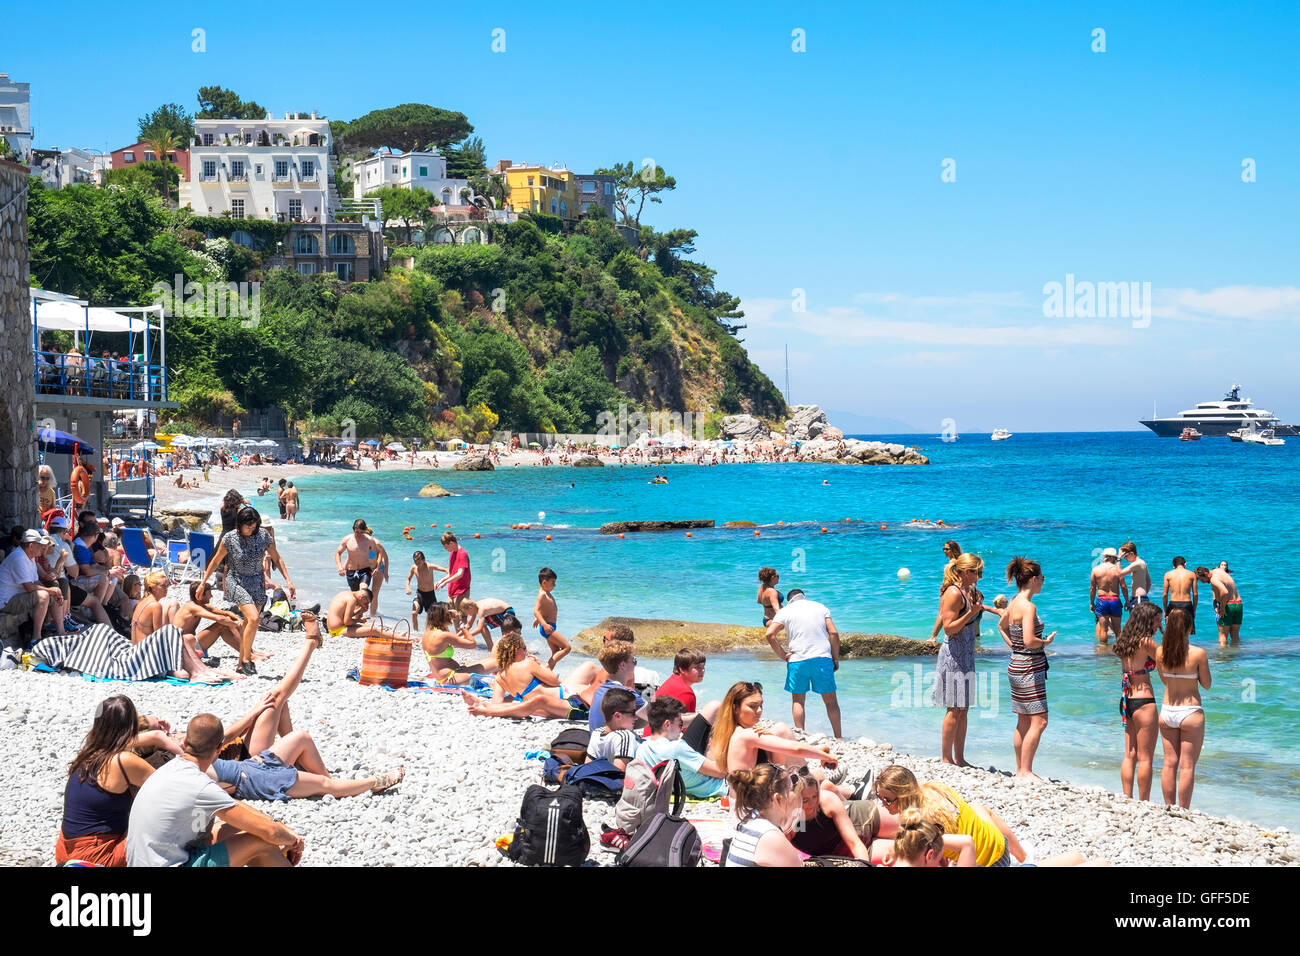 Capri Italy Beach High Resolution Stock Photography And Images Alamy